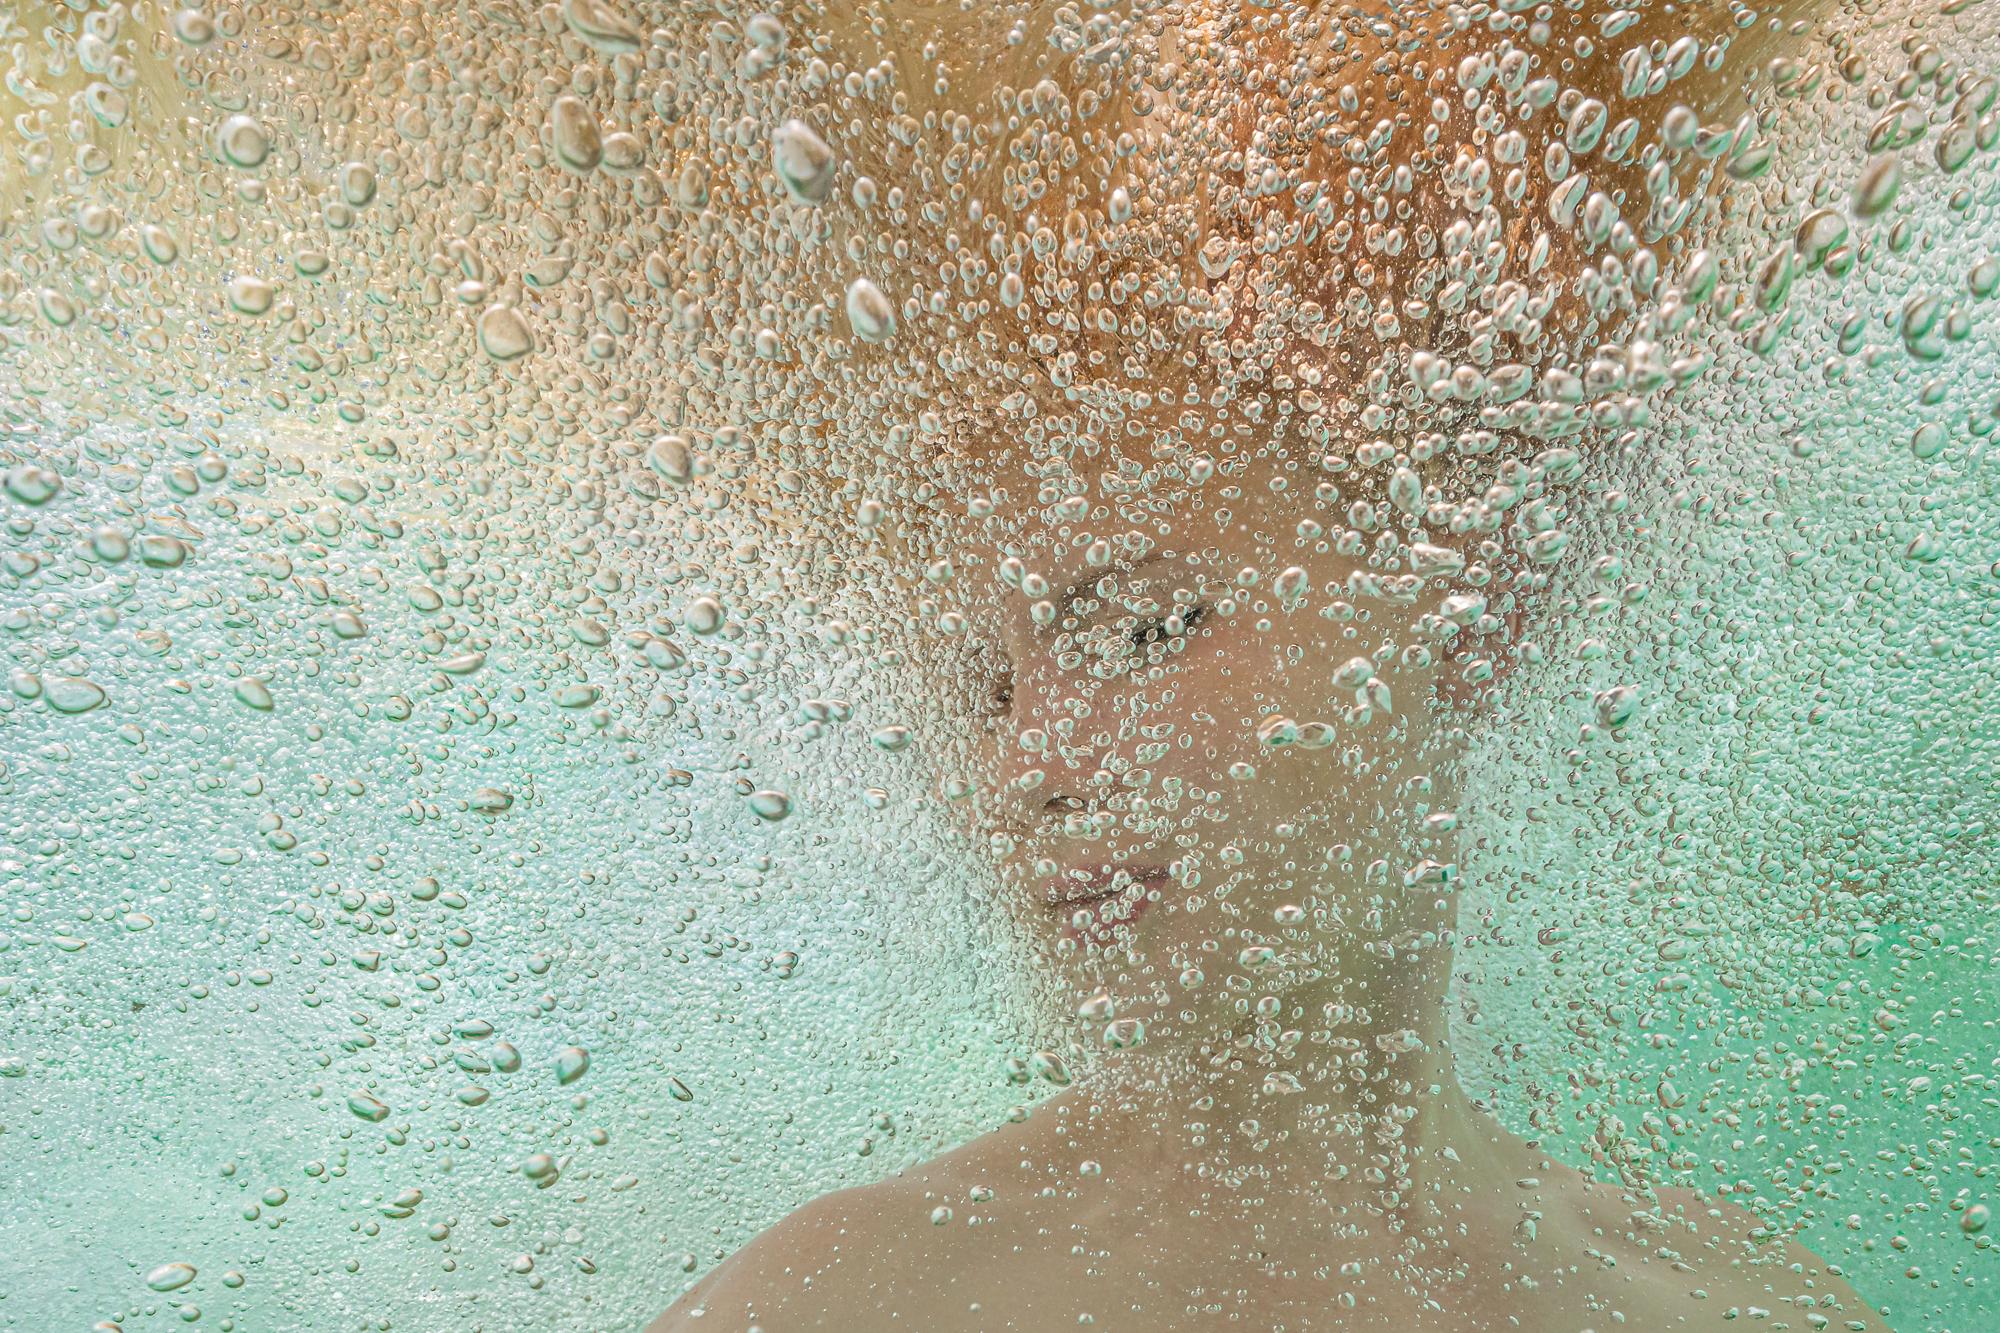 Alex Sher Color Photograph - Sweet Champagne - underwater photograph - archival pigment print 18 x 24"